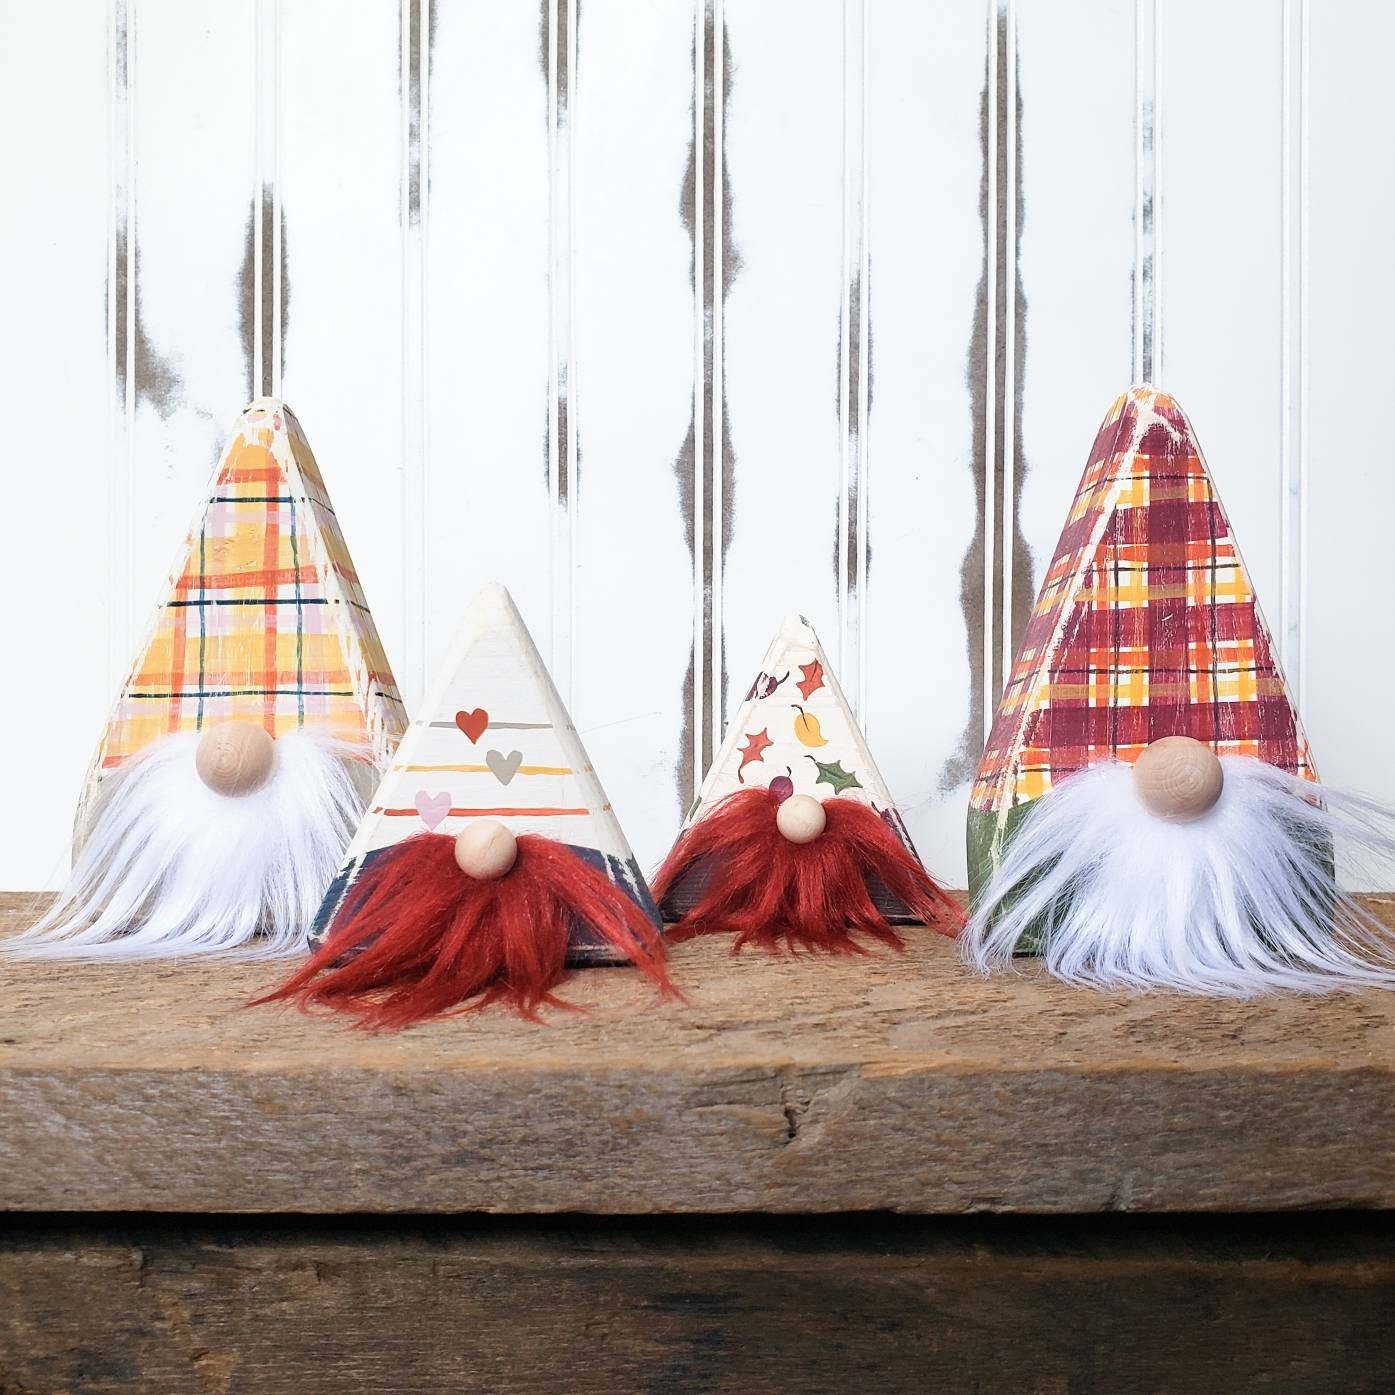  Gnome Beards for Crafting, 28 Pieces Pre-Cut Christmas